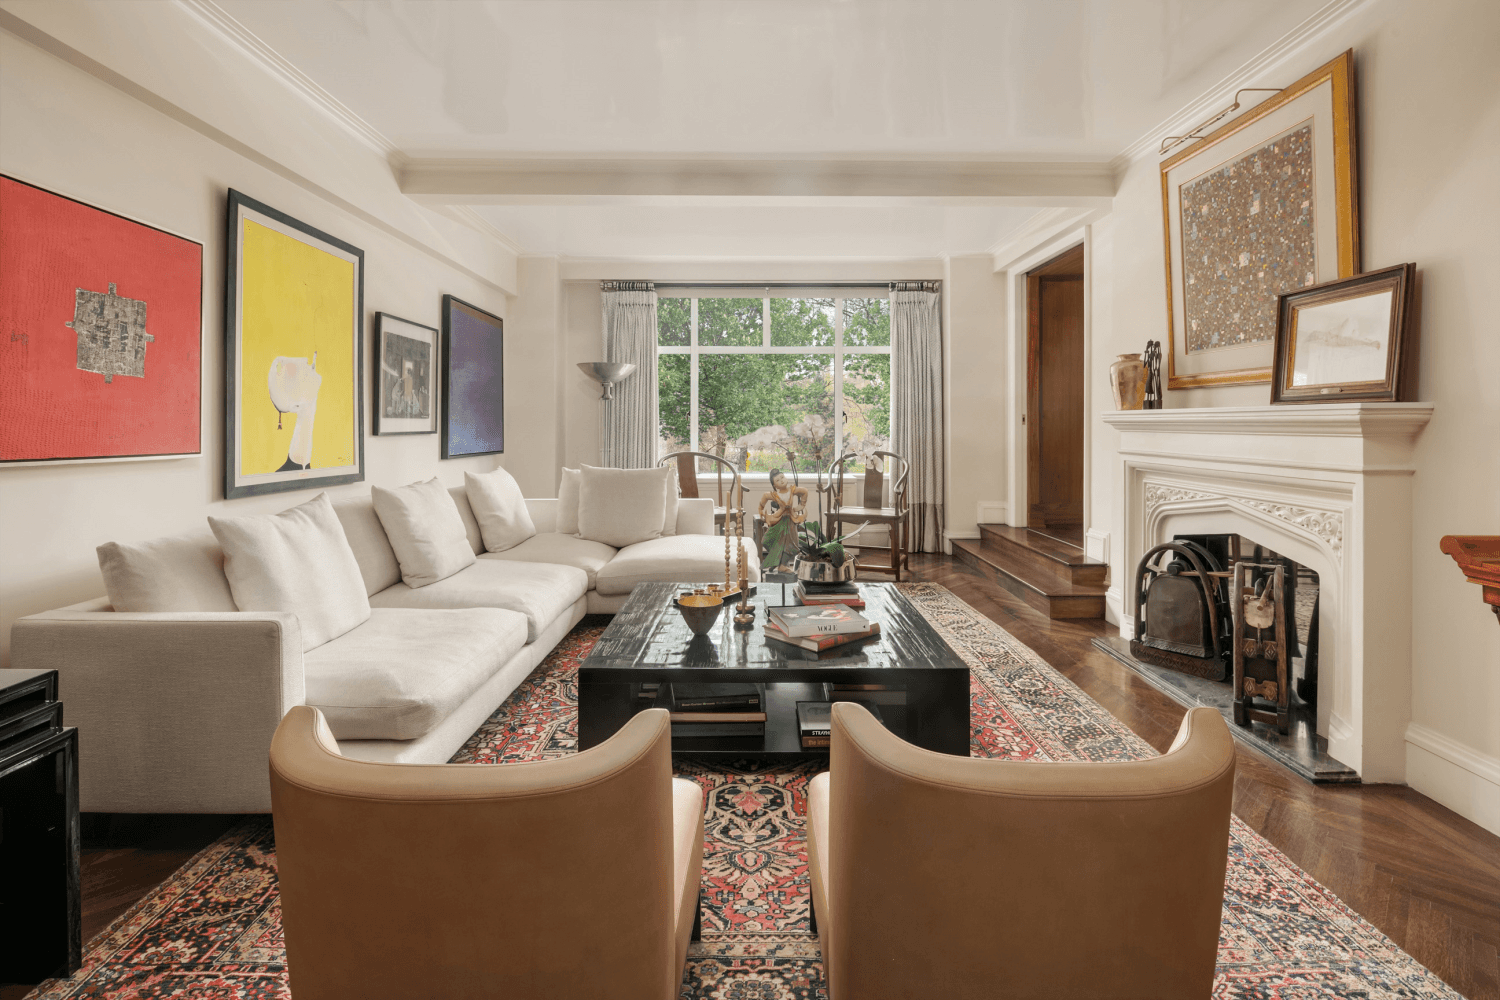 Introducing an impeccably redesigned gem on Central Park West This sprawling classic 6 home boasts unrivaled views of Central Park and the Manhattan skyline.